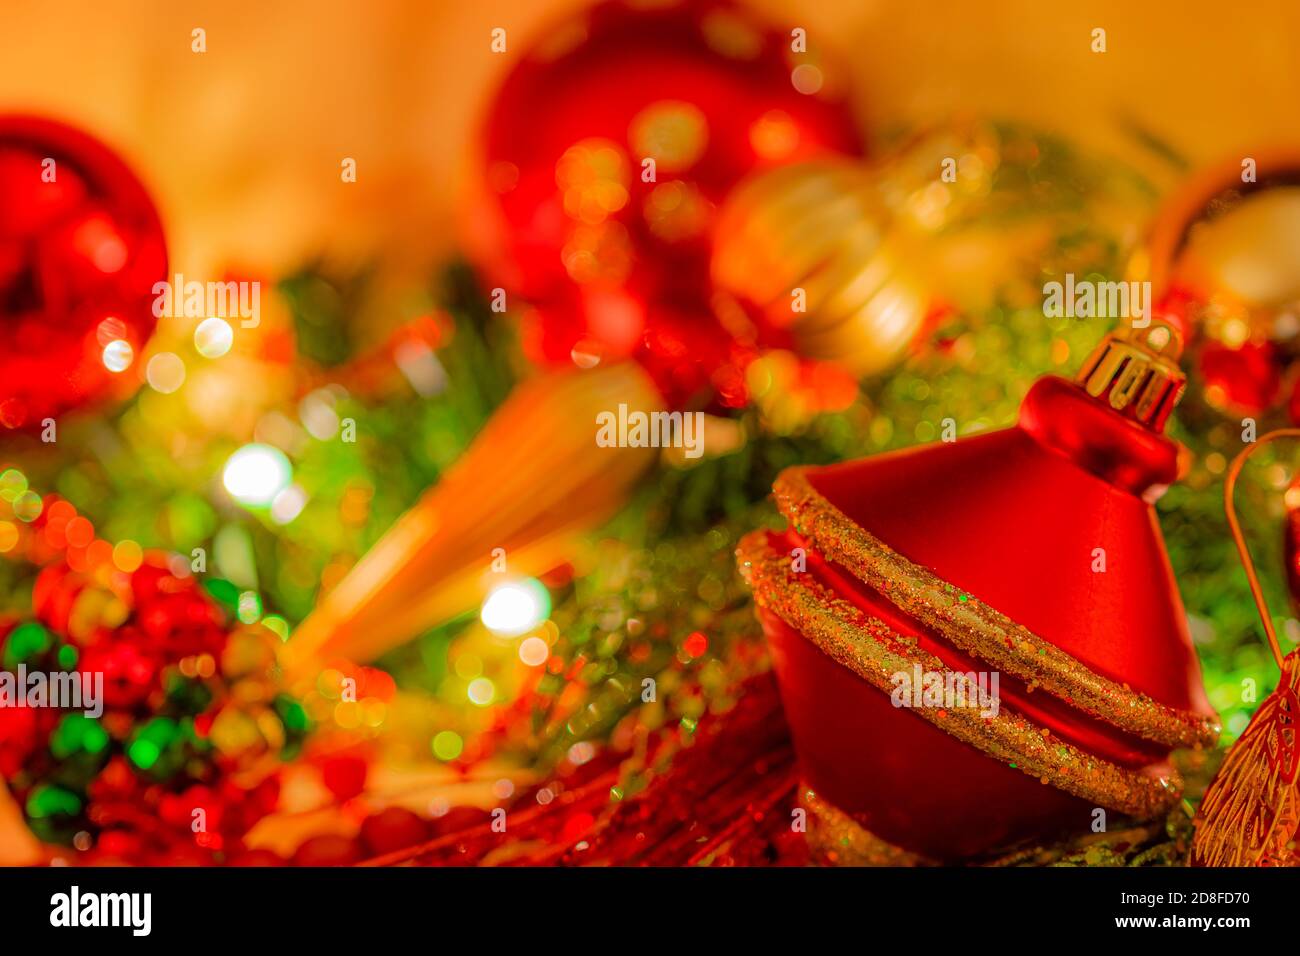 Christmas ornament in red and gold color is  surrounded by soft focus ornaments in bright glittering  colors on a fireplace mantel. Stock Photo